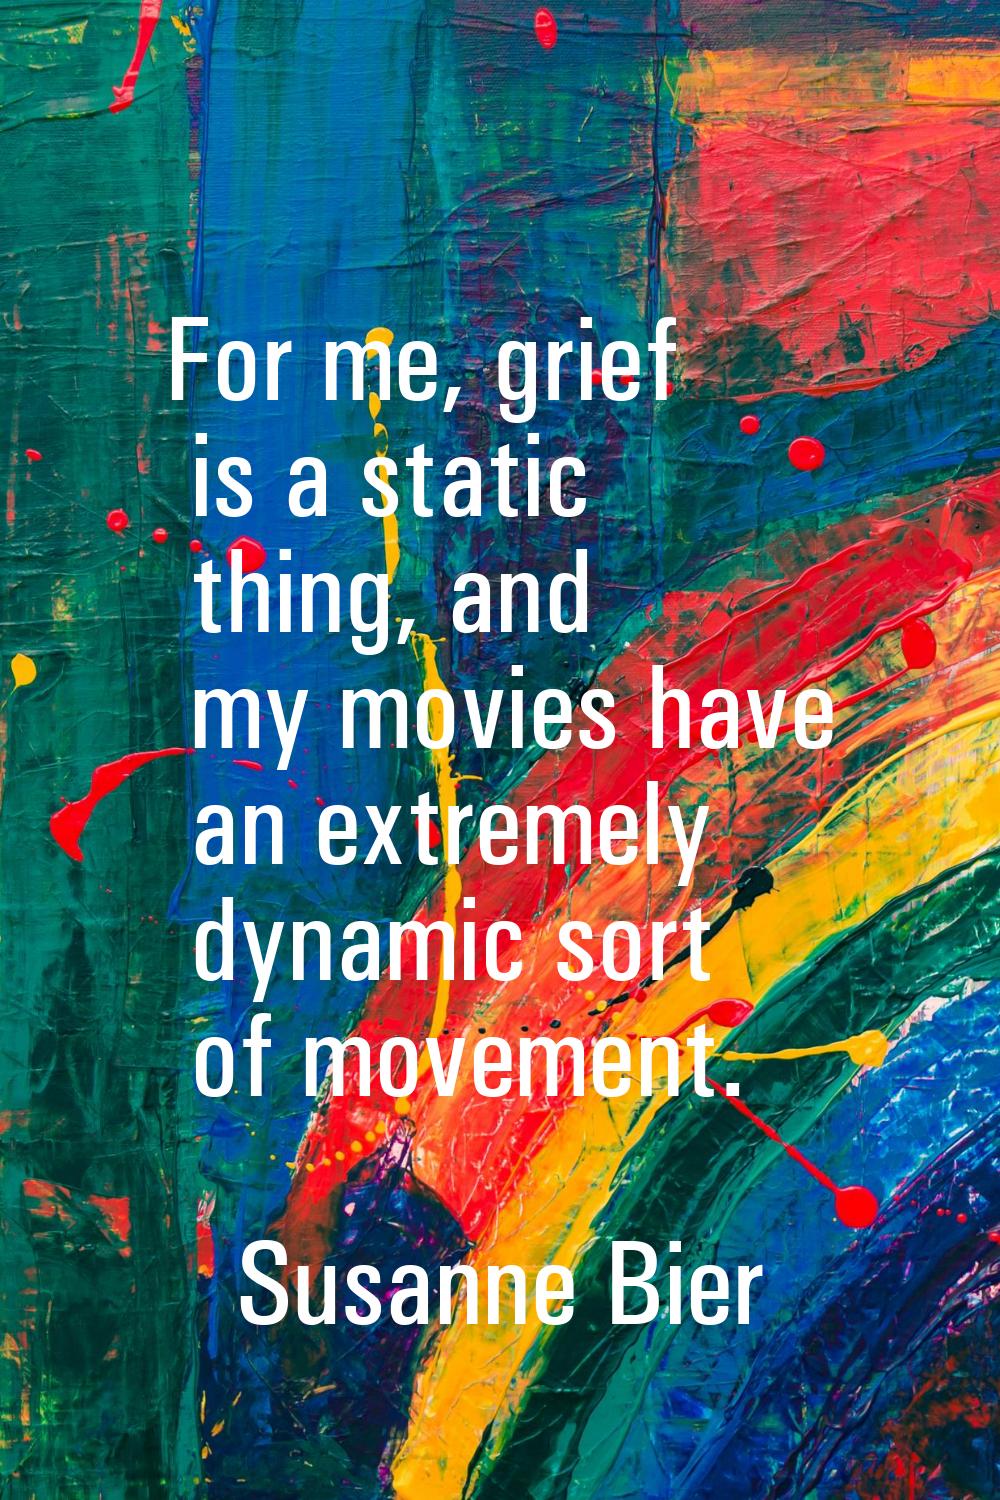 For me, grief is a static thing, and my movies have an extremely dynamic sort of movement.